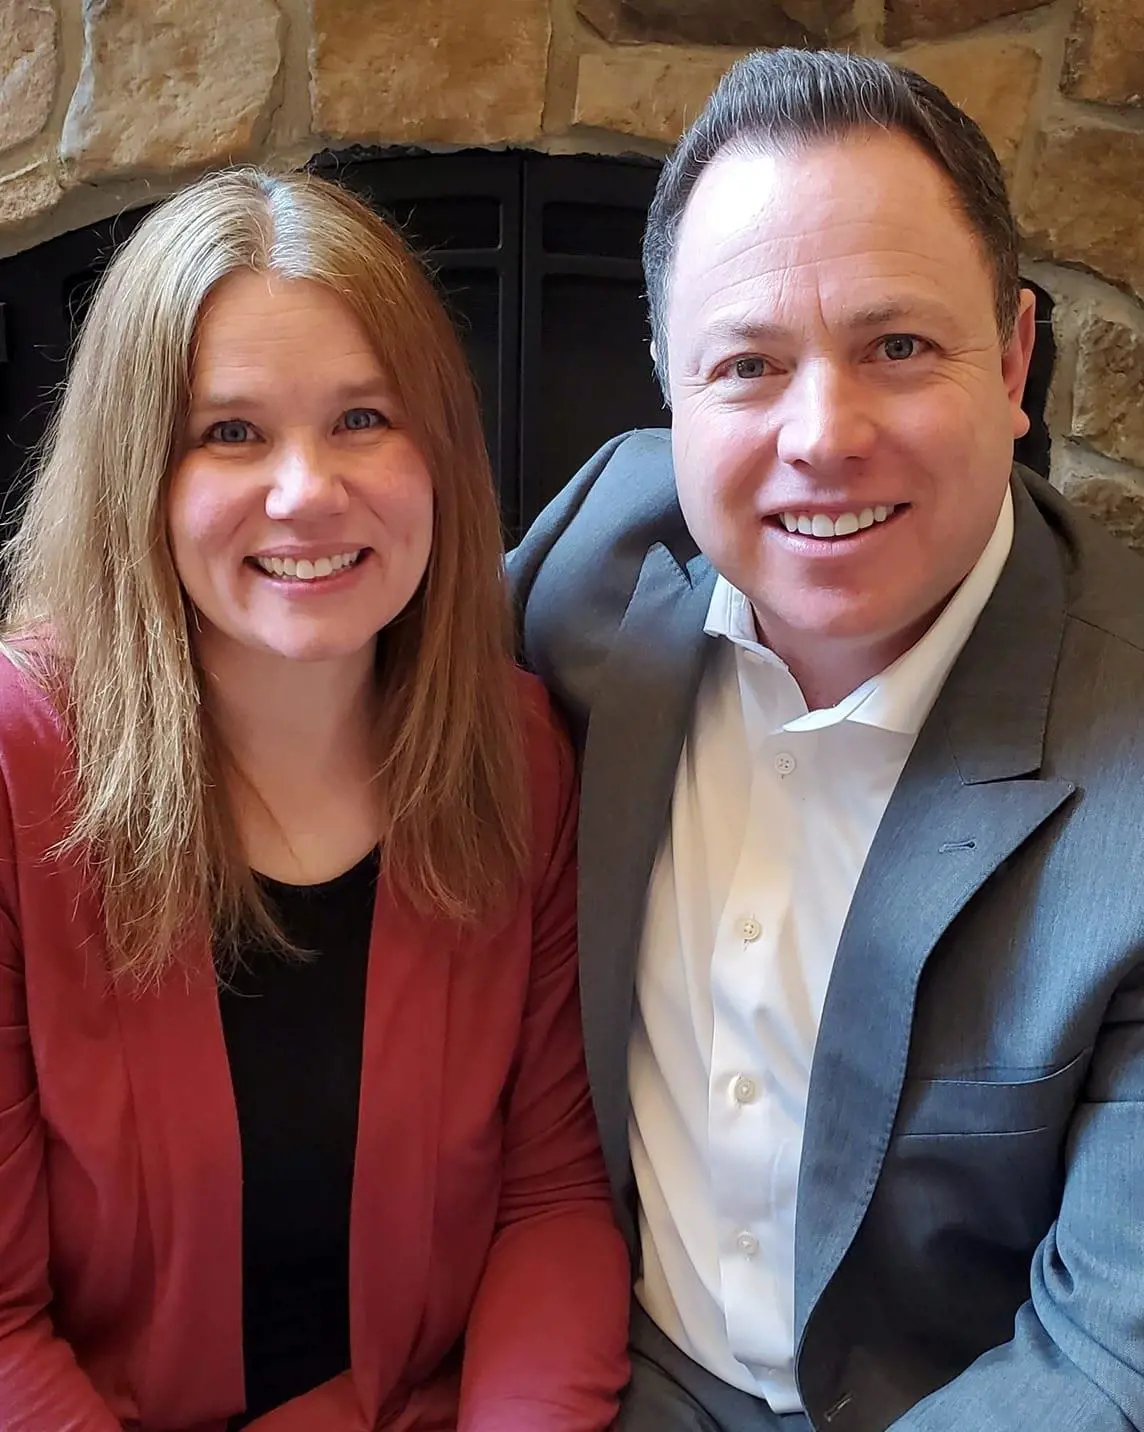 Cameron Fugal, CEO and founder of Aero Dynamic Jets, pictured with his wife of 27 years, Danielle Fugal